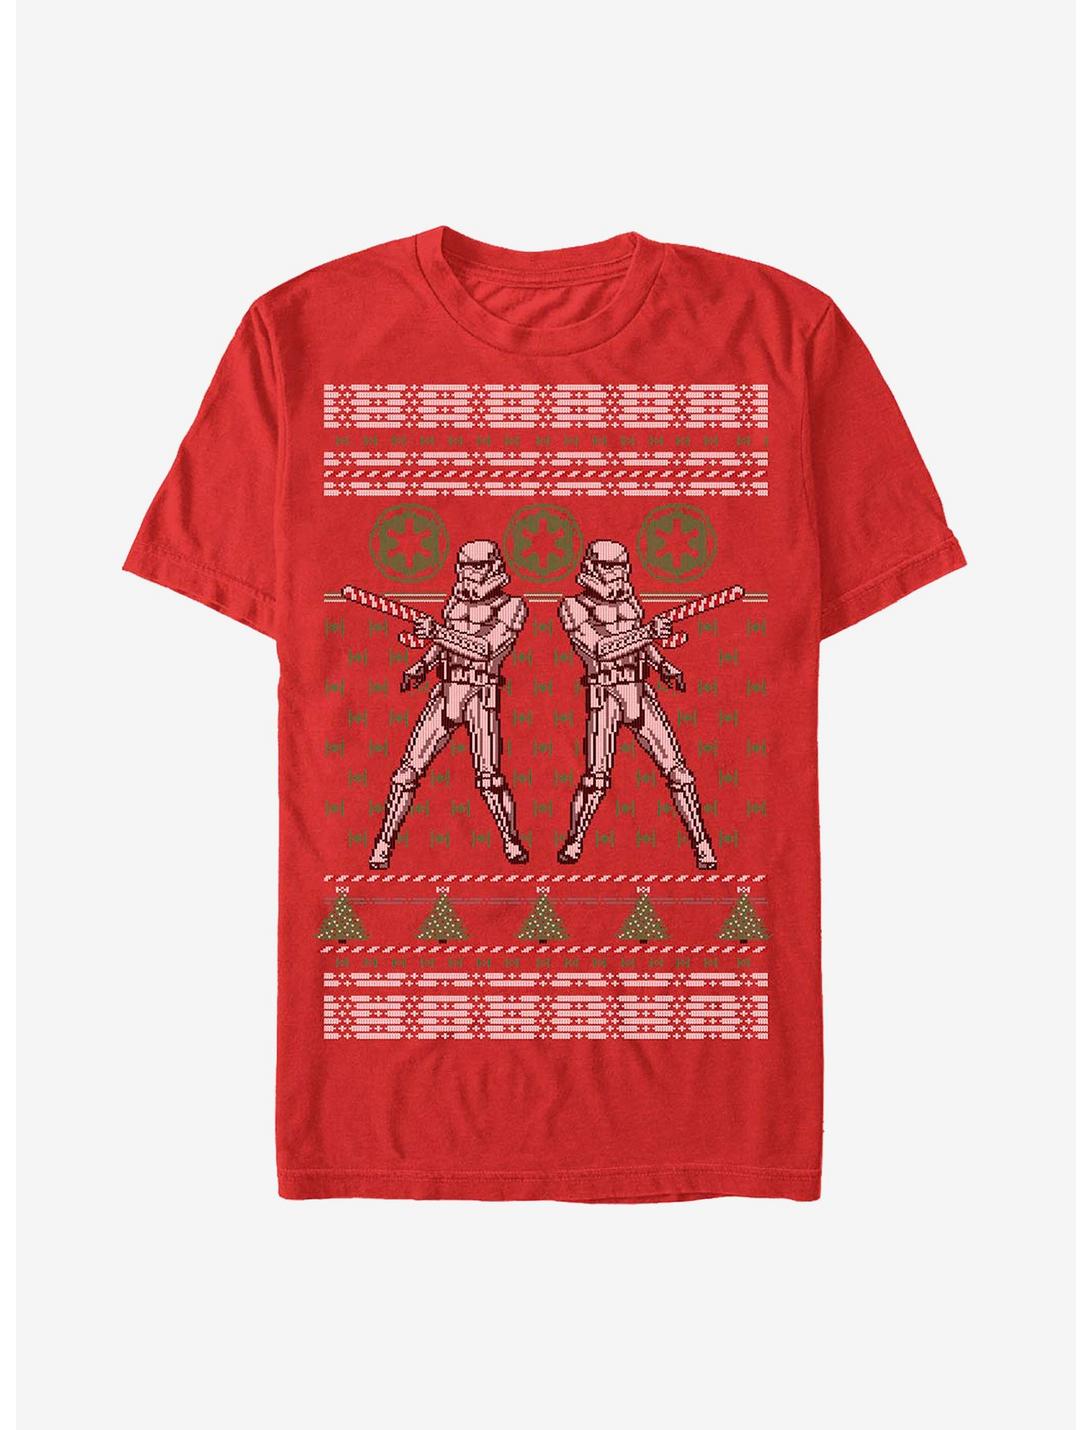 Star Wars Holiday Ugly Storm Trooper T-Shirt, RED, hi-res